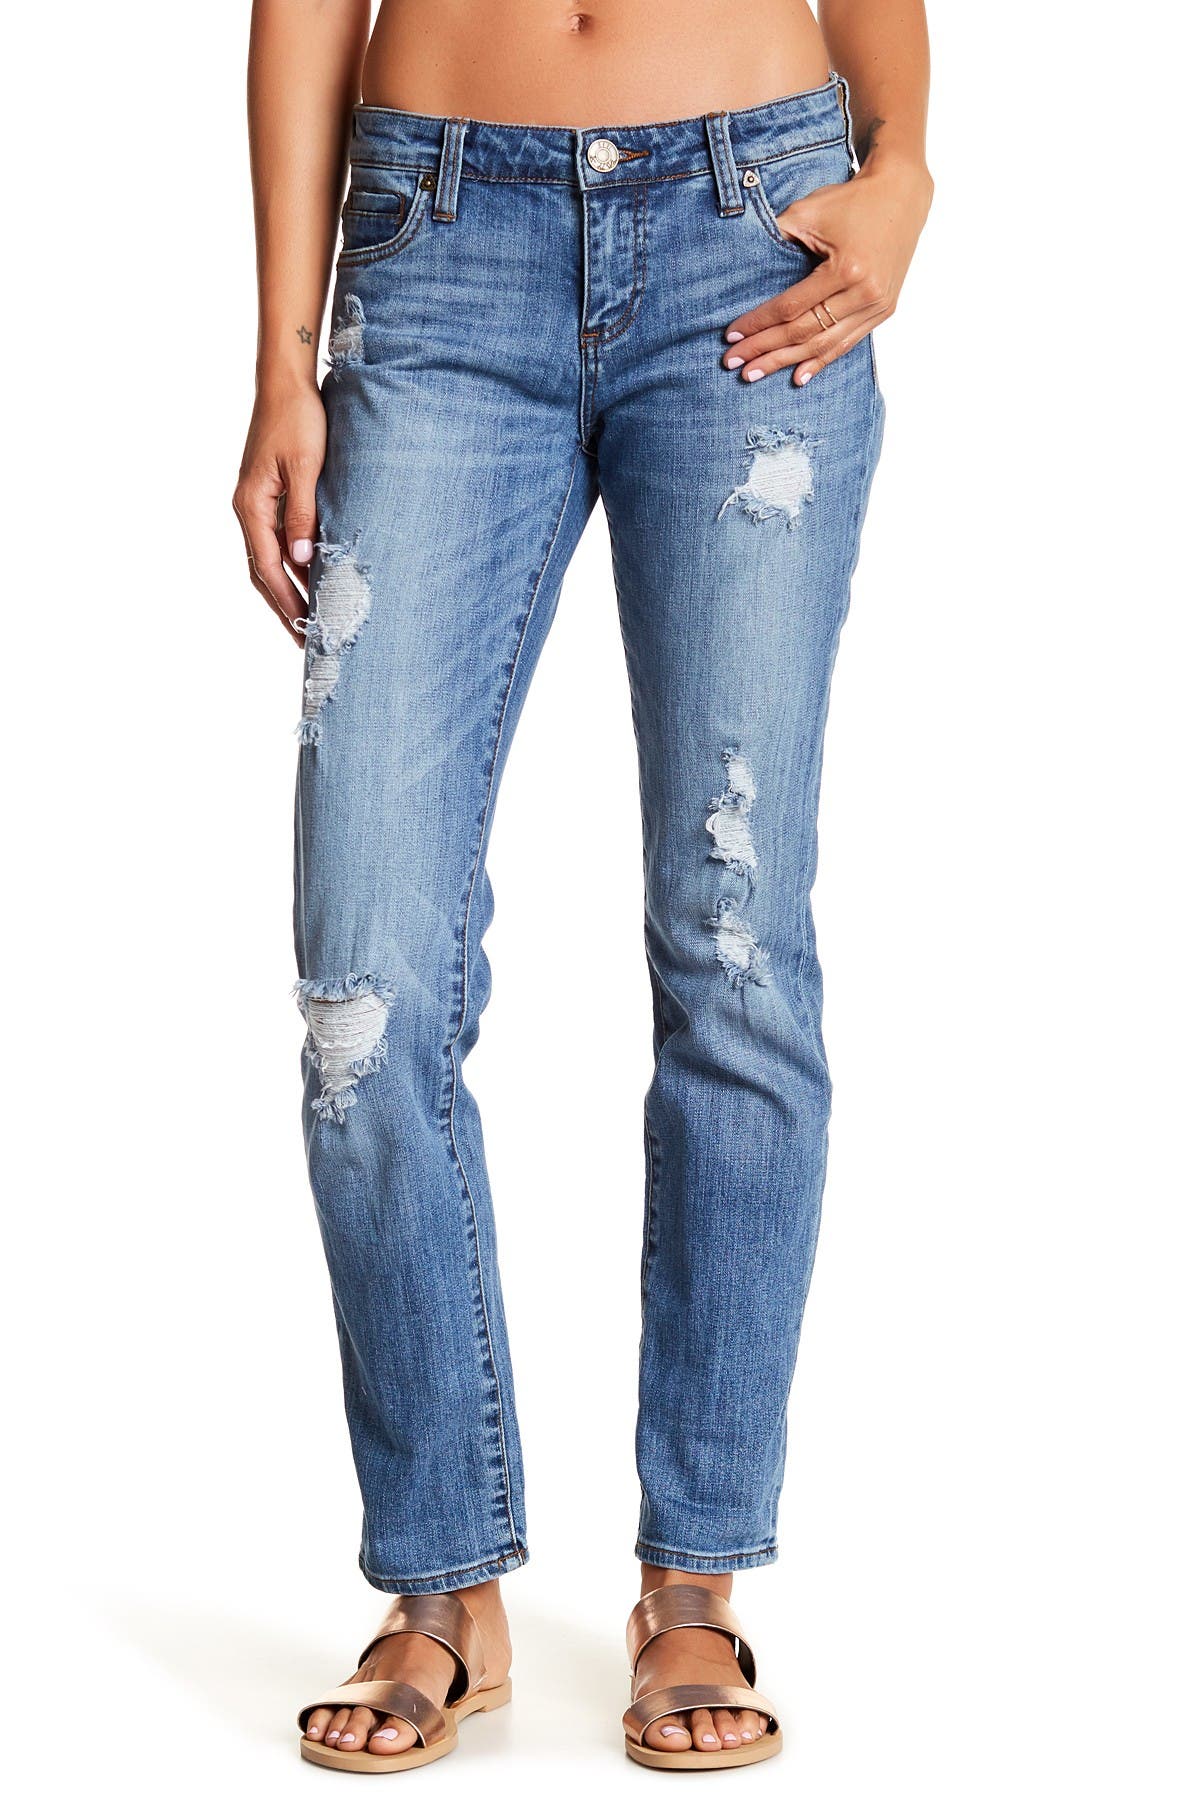 kut from the kloth katy jeans